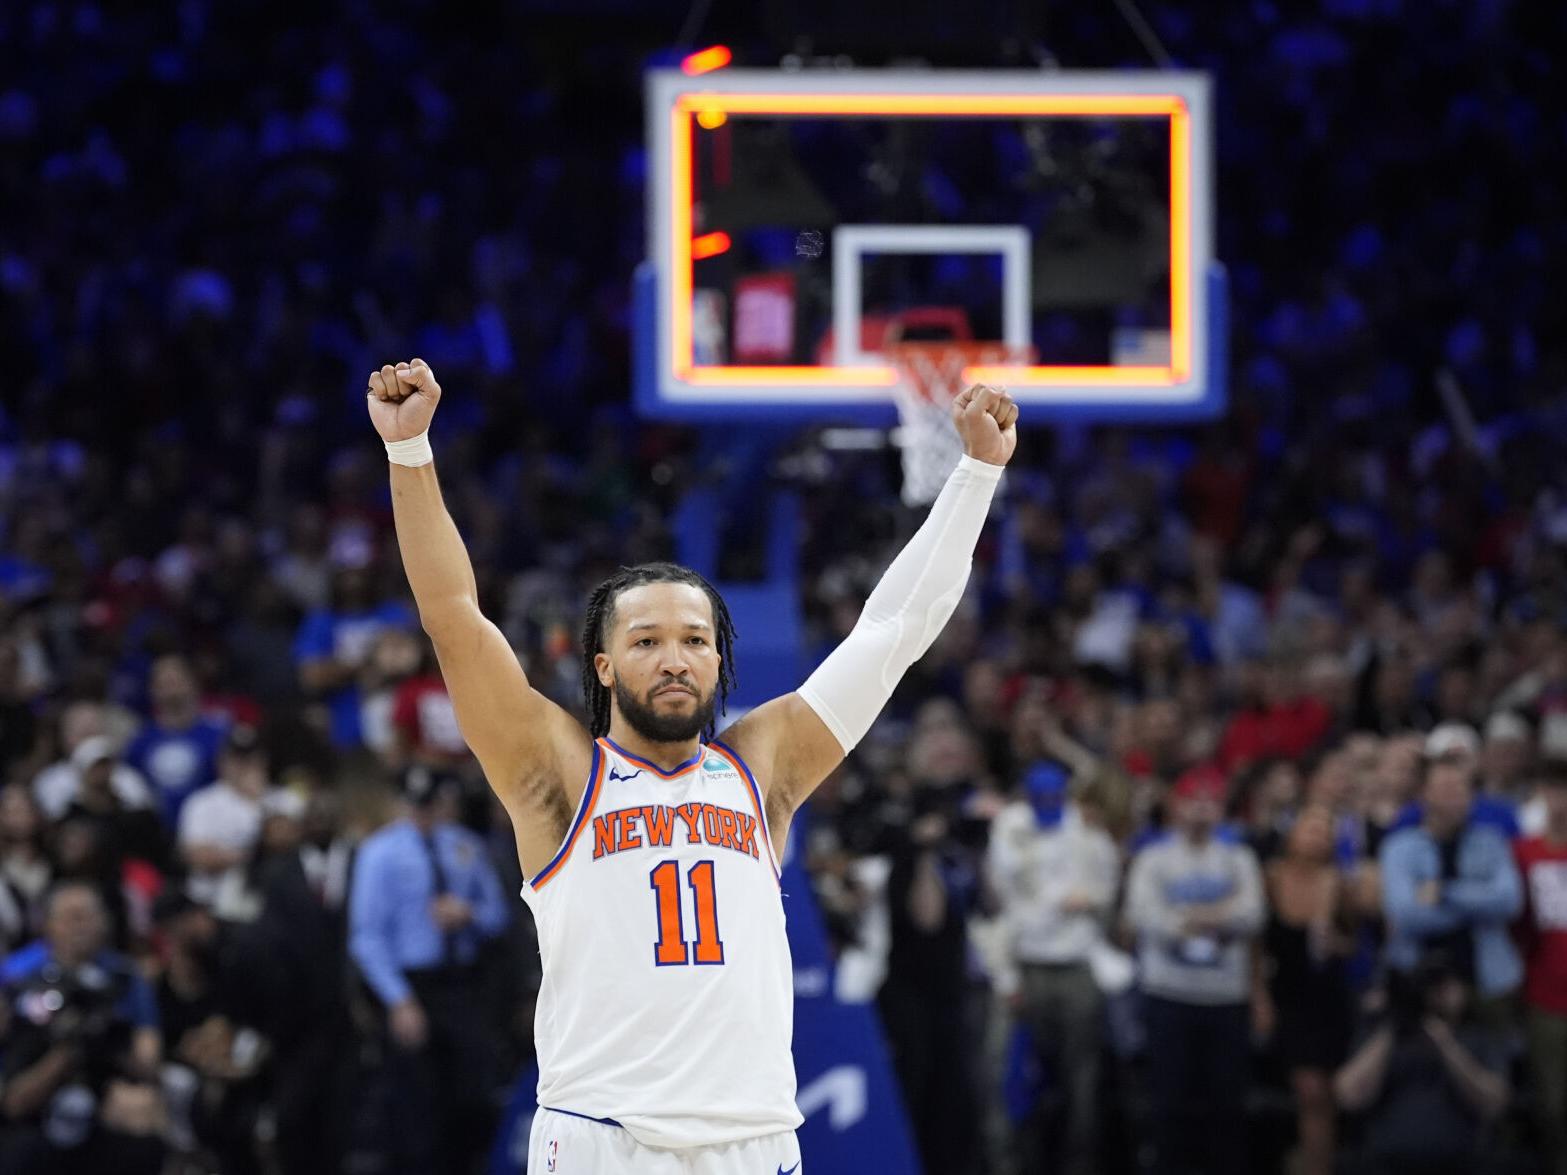 The Knicks take a 2-0 lead after Jalen Brunson returns from injury. - Jalen Brunson's impact on the Knicks in the playoffs